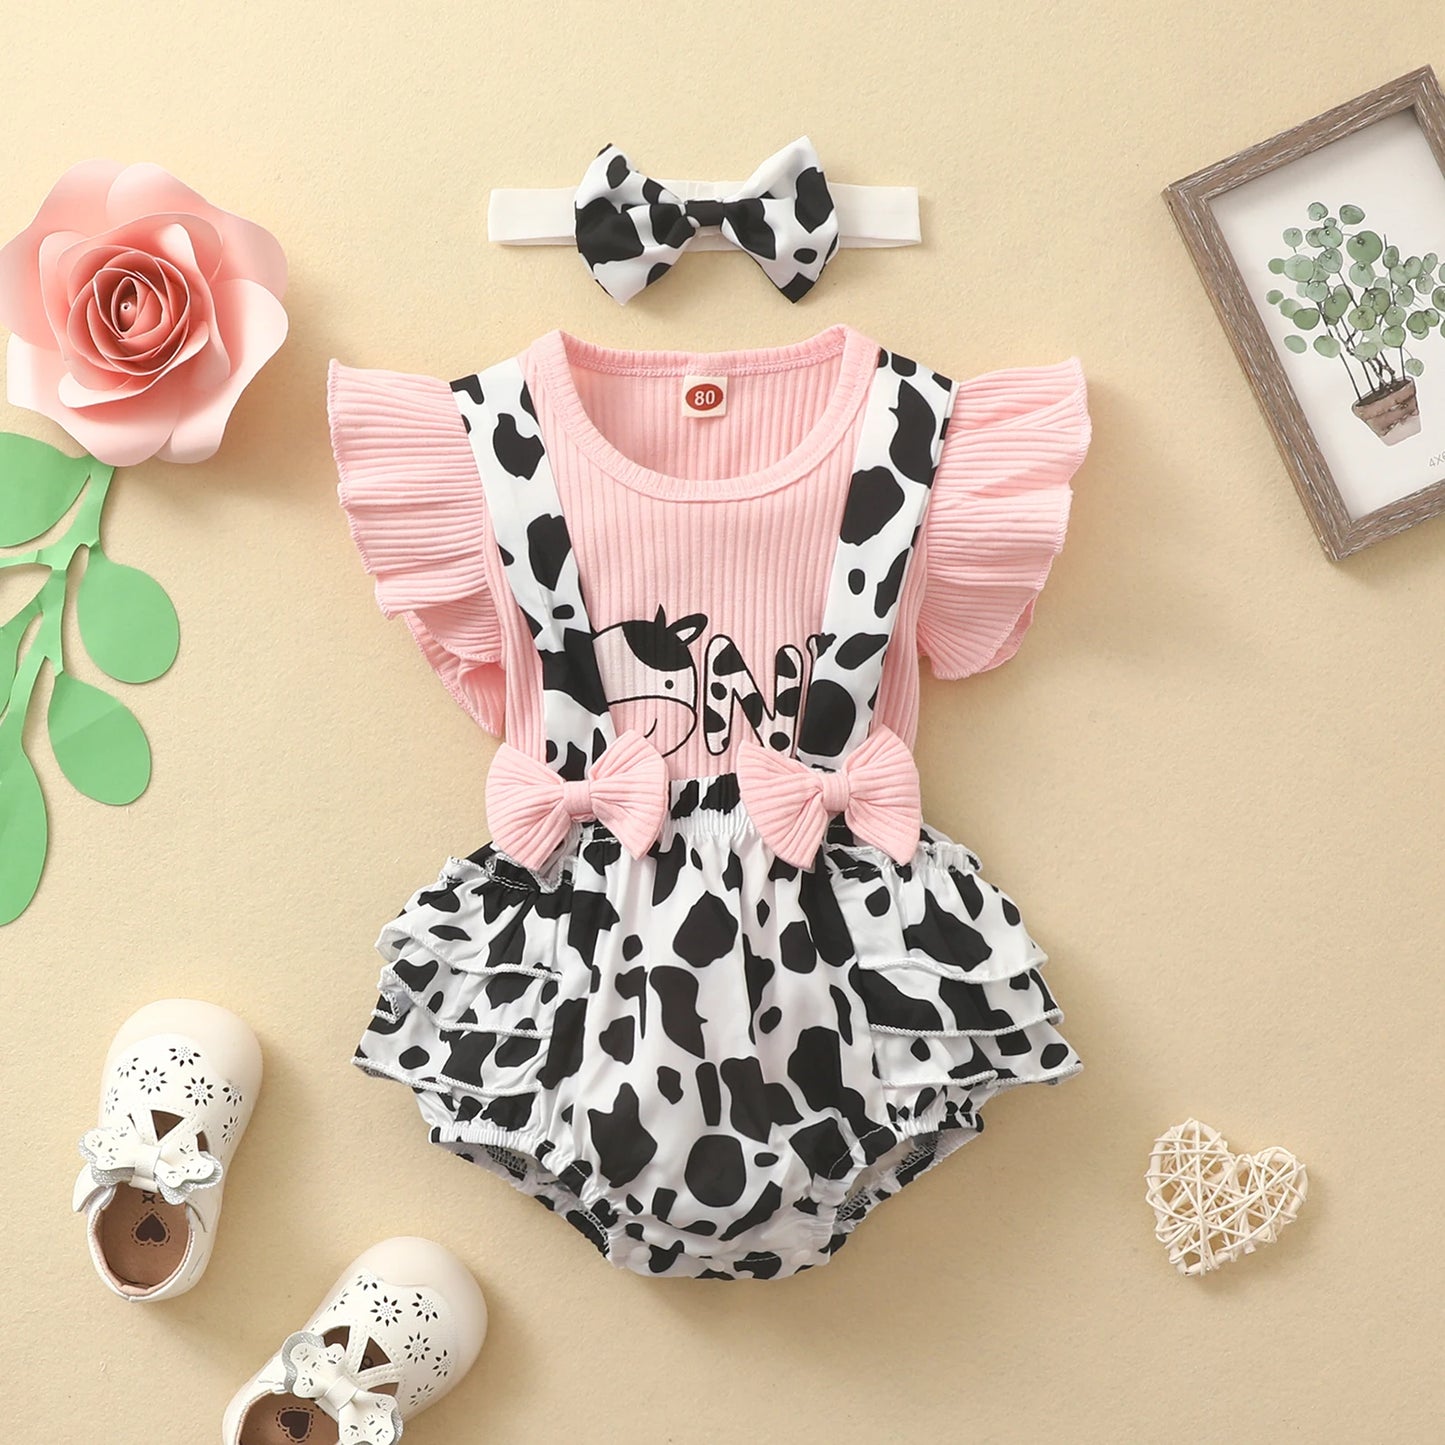 Infant Baby Girls Three Pieces Clothes Outfit, Round Neck Fly Sleeve Tops + Milk Cow Printed Suspender Shorts + Headband